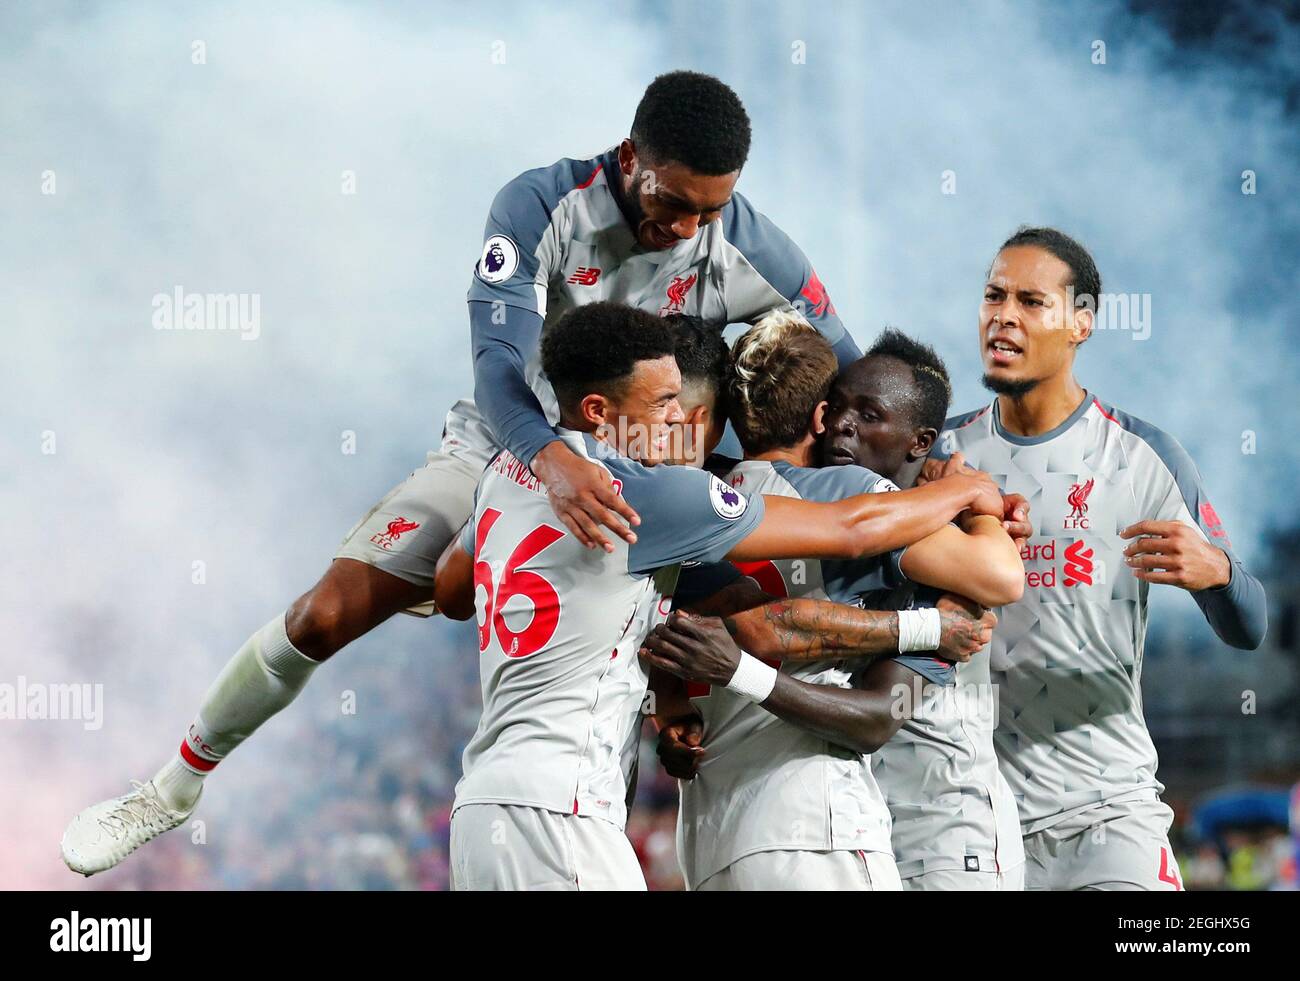 Soccer Football - Premier League - Crystal Palace v Liverpool - Selhurst Park, London, Britain - August 20, 2018  Liverpool's Sadio Mane celebrates scoring their second goal with team mates                     REUTERS/Eddie Keogh  EDITORIAL USE ONLY. No use with unauthorized audio, video, data, fixture lists, club/league logos or 'live' services. Online in-match use limited to 75 images, no video emulation. No use in betting, games or single club/league/player publications.  Please contact your account representative for further details. Stock Photo